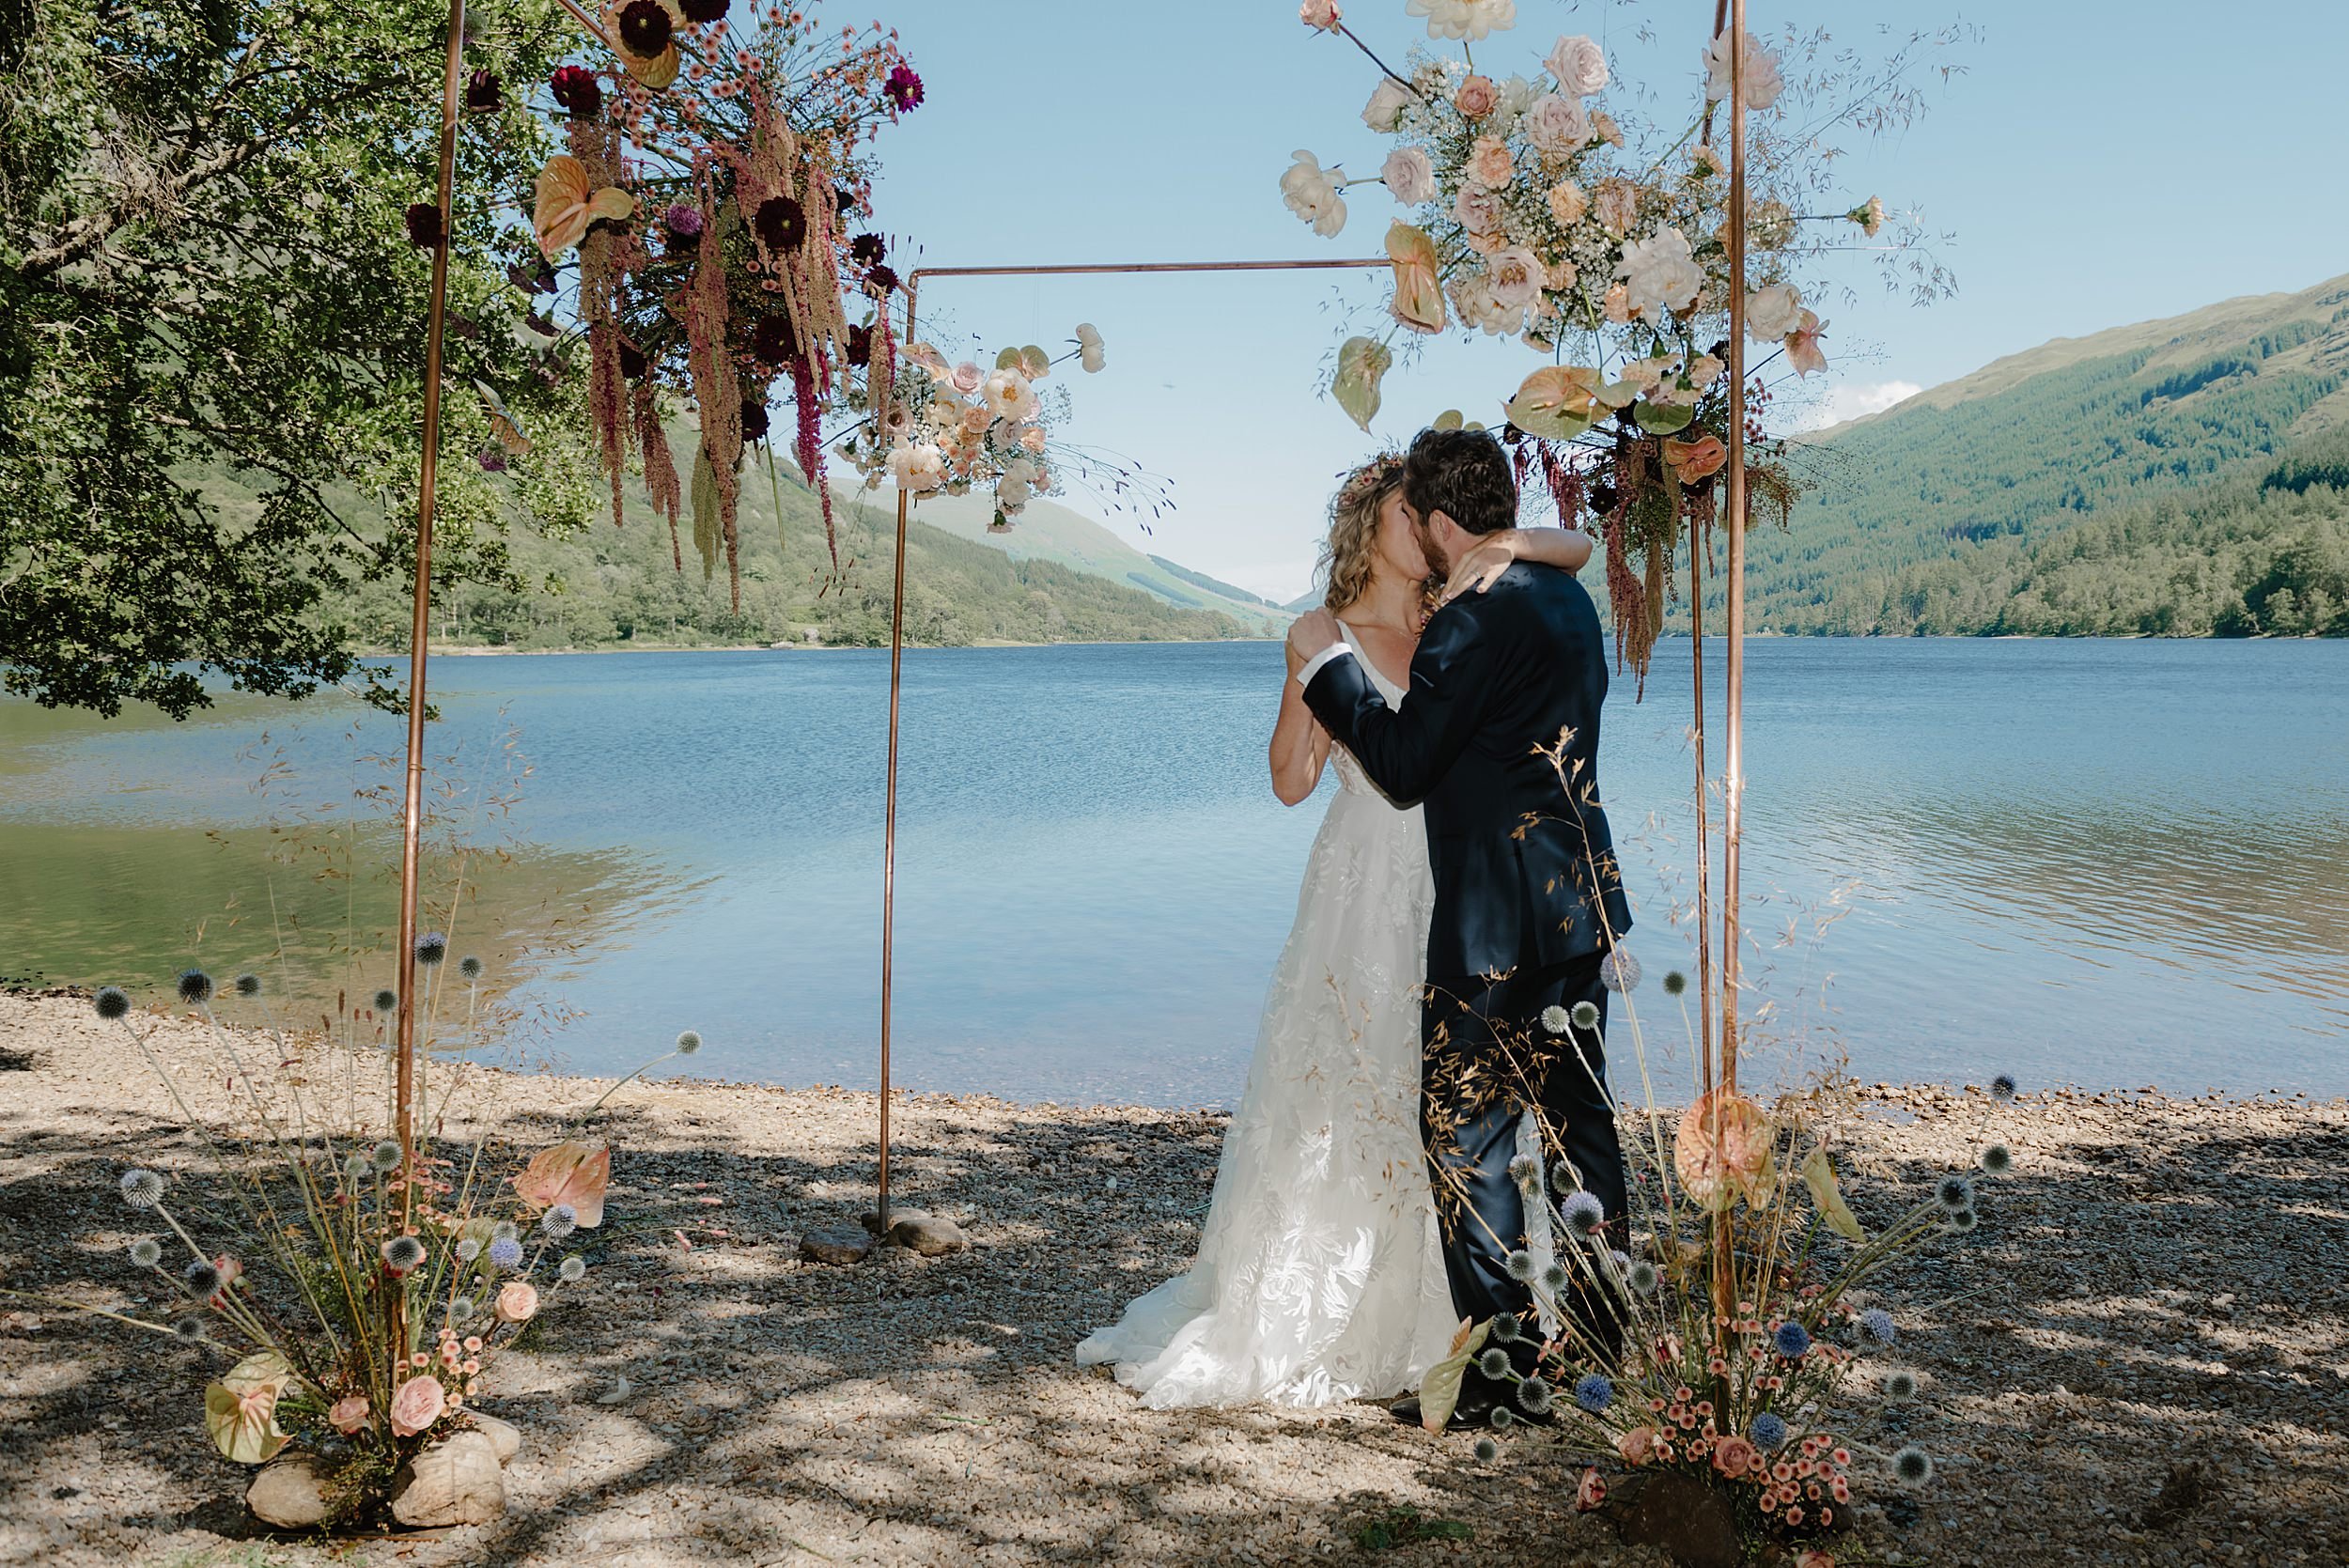 the bride and groom kiss beneath the chuppah on the edge of a loch during their Monachyle Mhor wedding ceremony in Perthshire Scotland